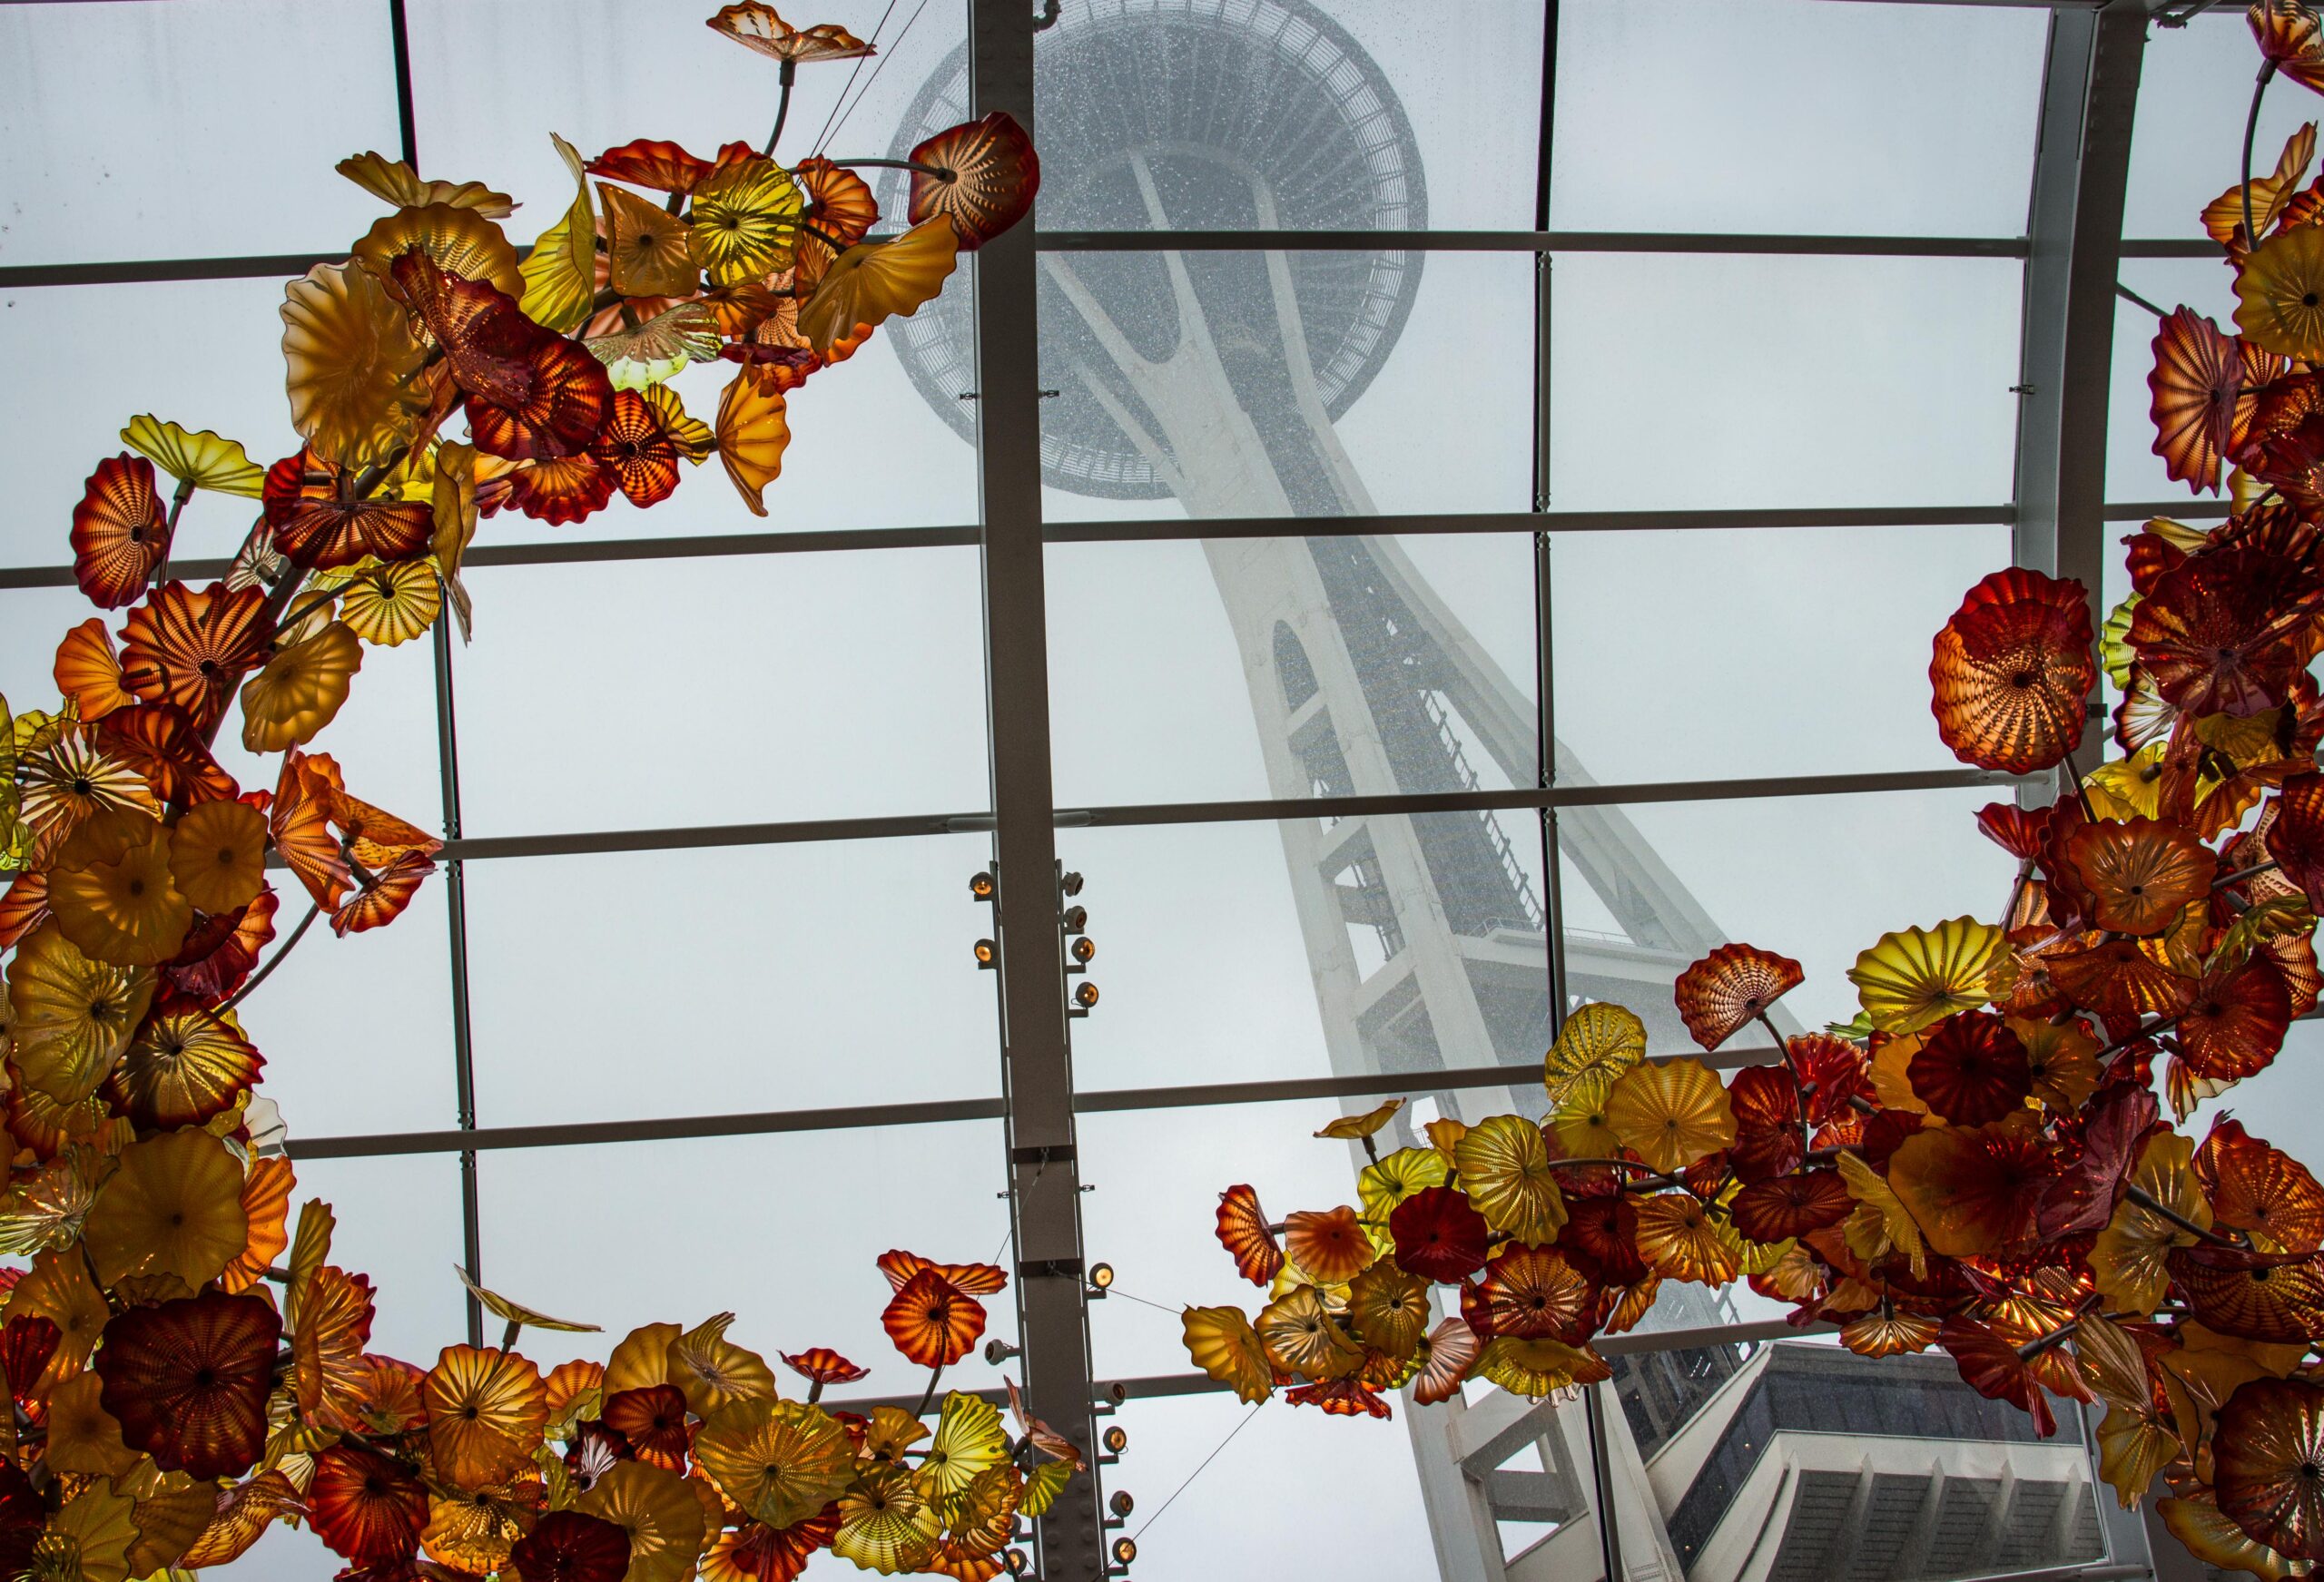 David Kalb, Chihuly in Seattle, Archival pigment print